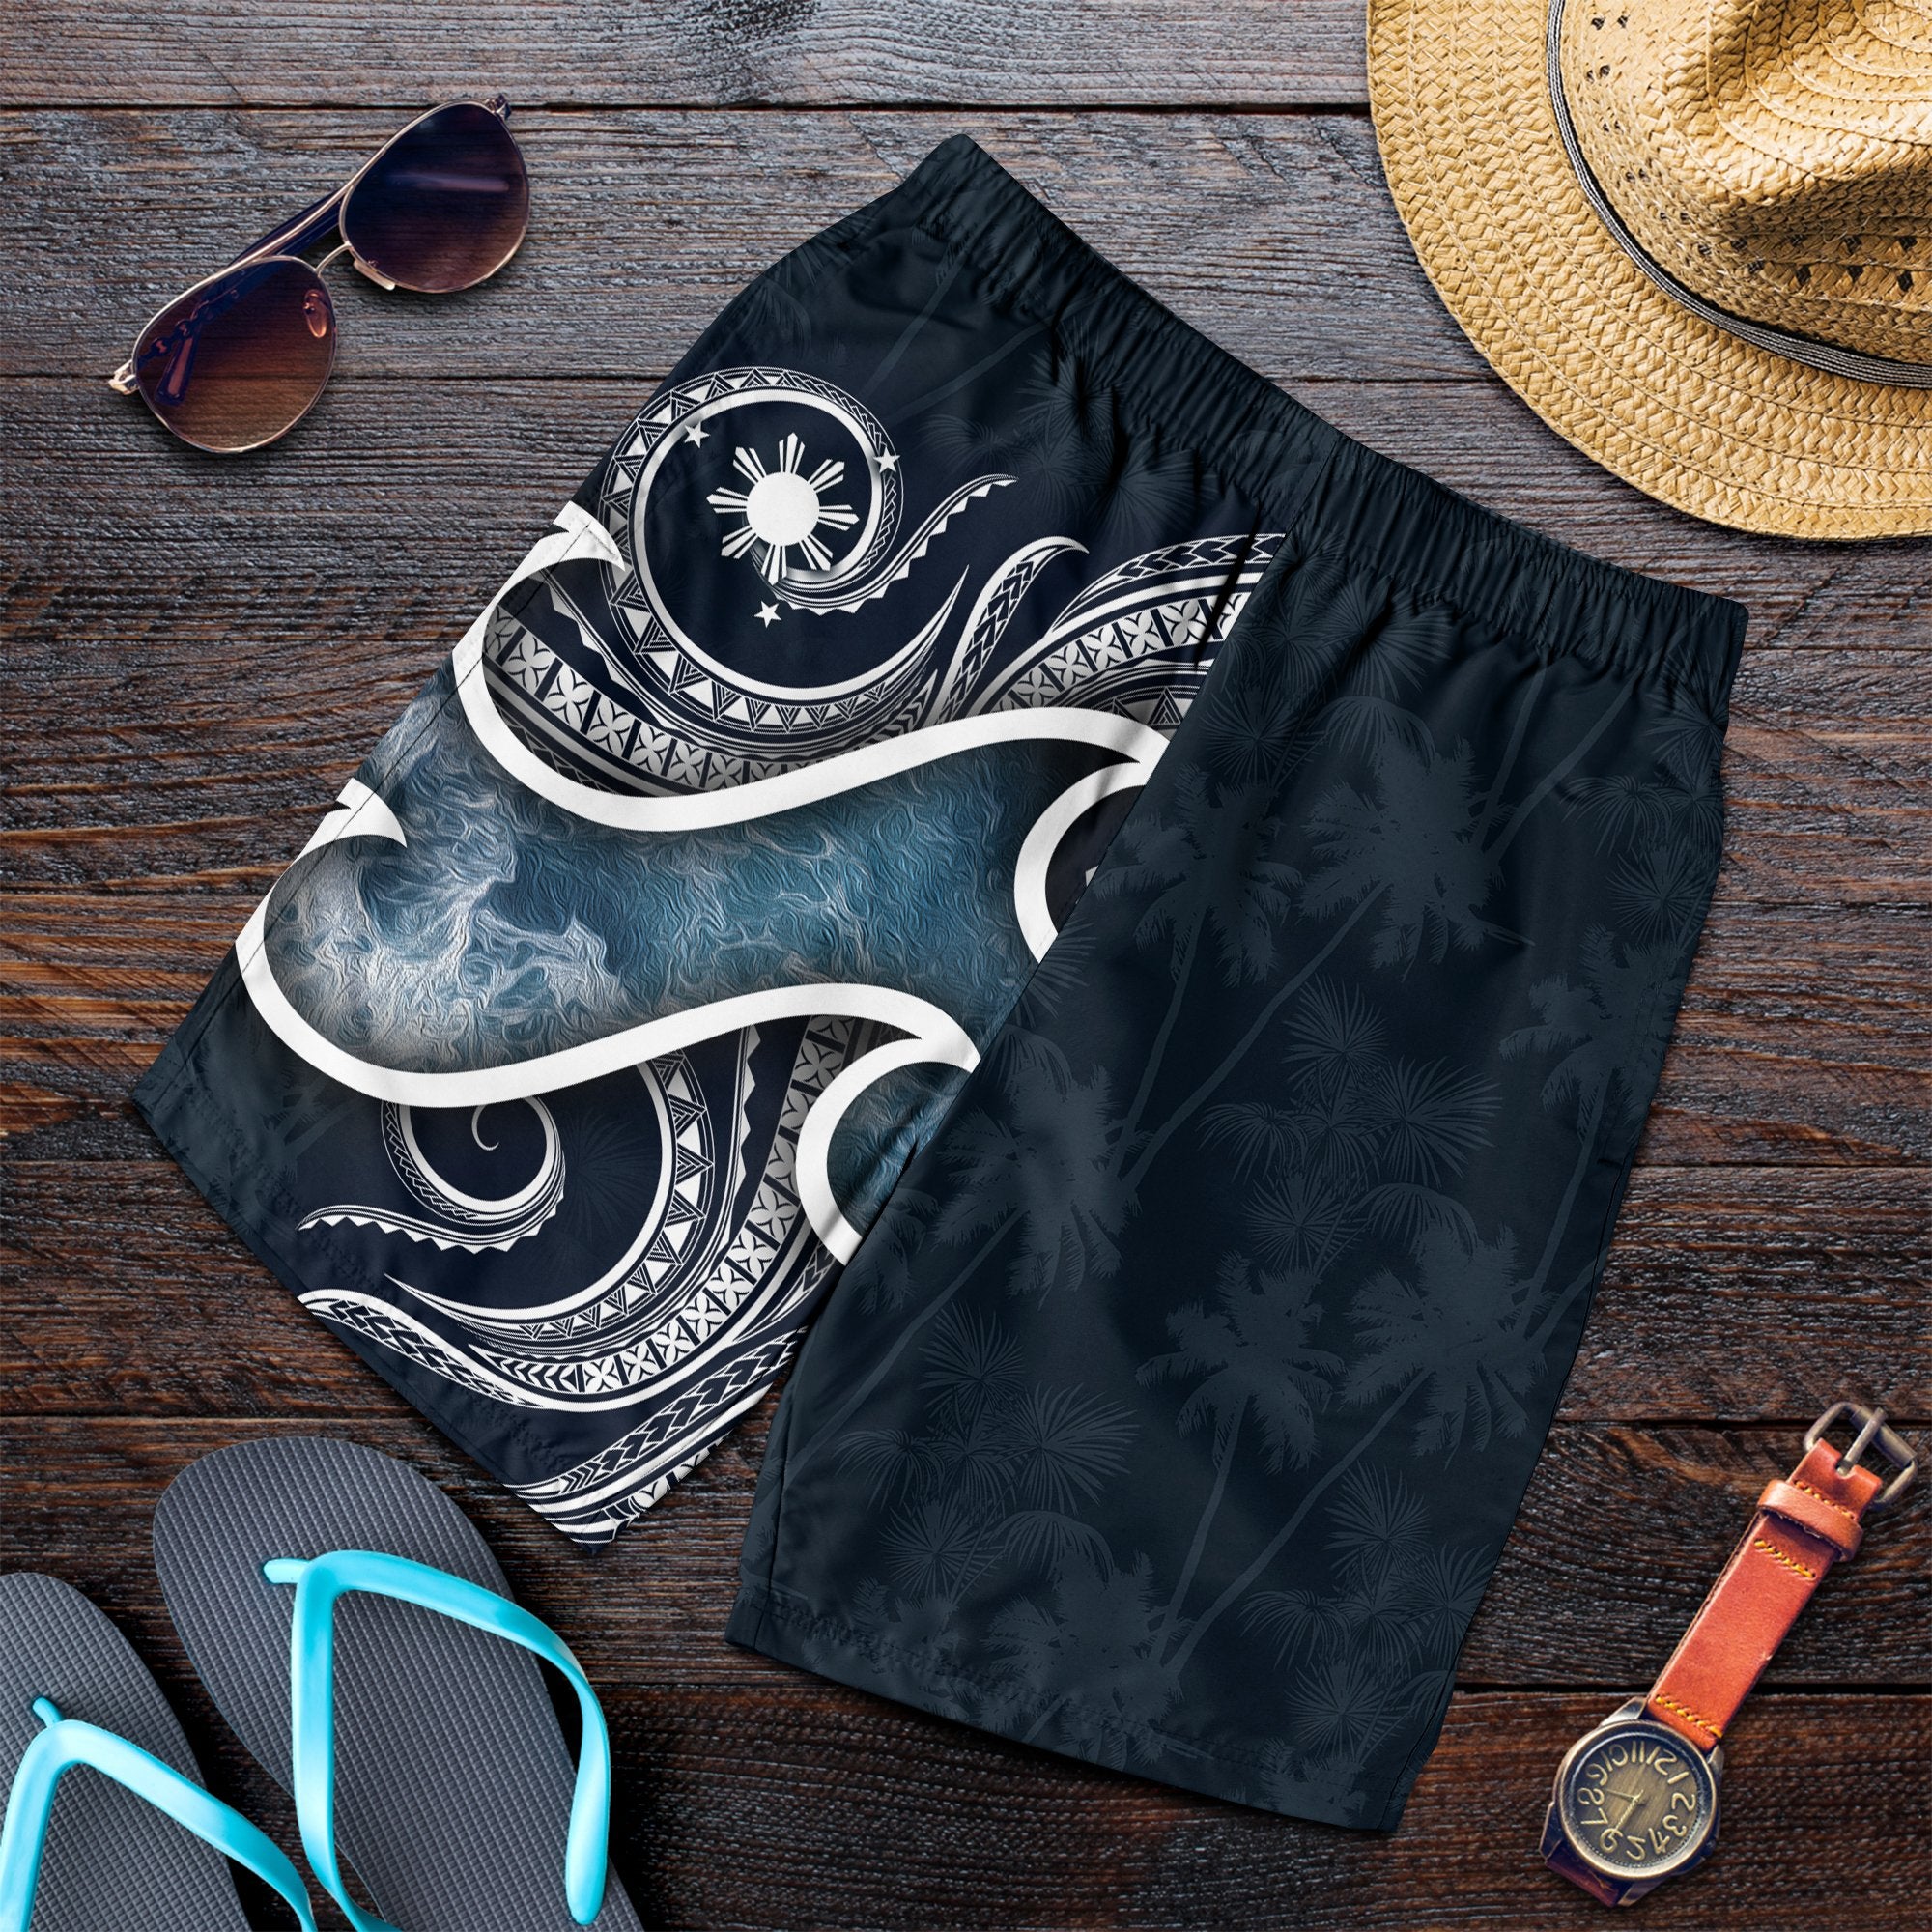 The Philippines Men's Shorts - Ocean Style Blue - Polynesian Pride